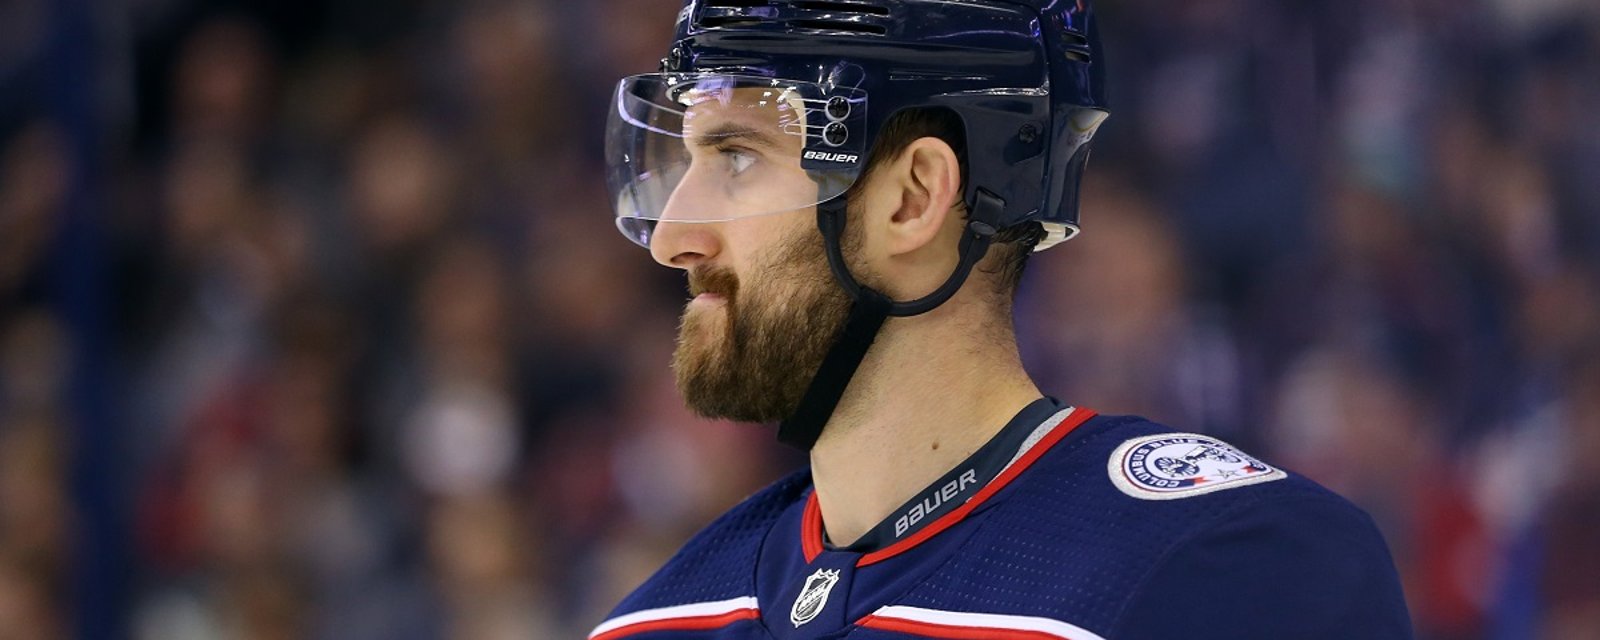 Foligno warns of impending battle between the NHL and its players.